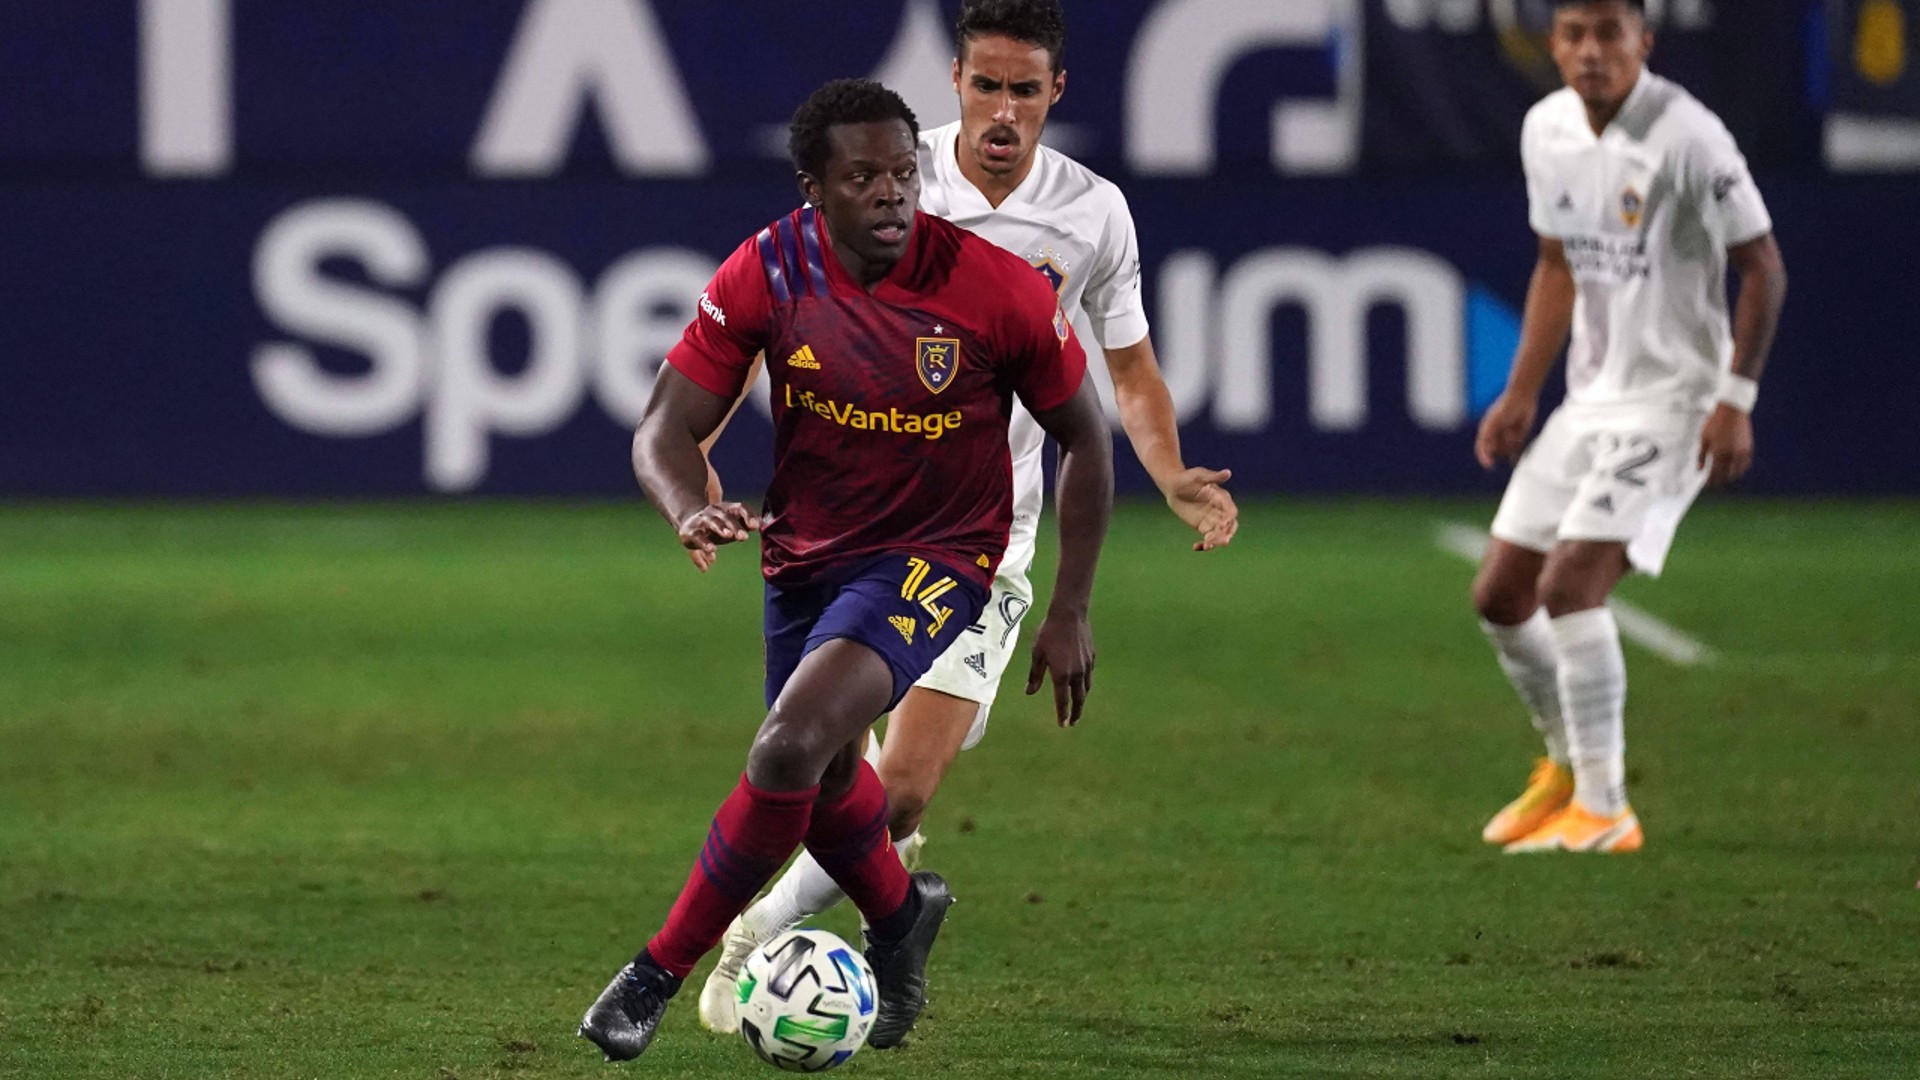 REAL DEAL: Nedum Onuoha in action during his time with Real Salt Lake.